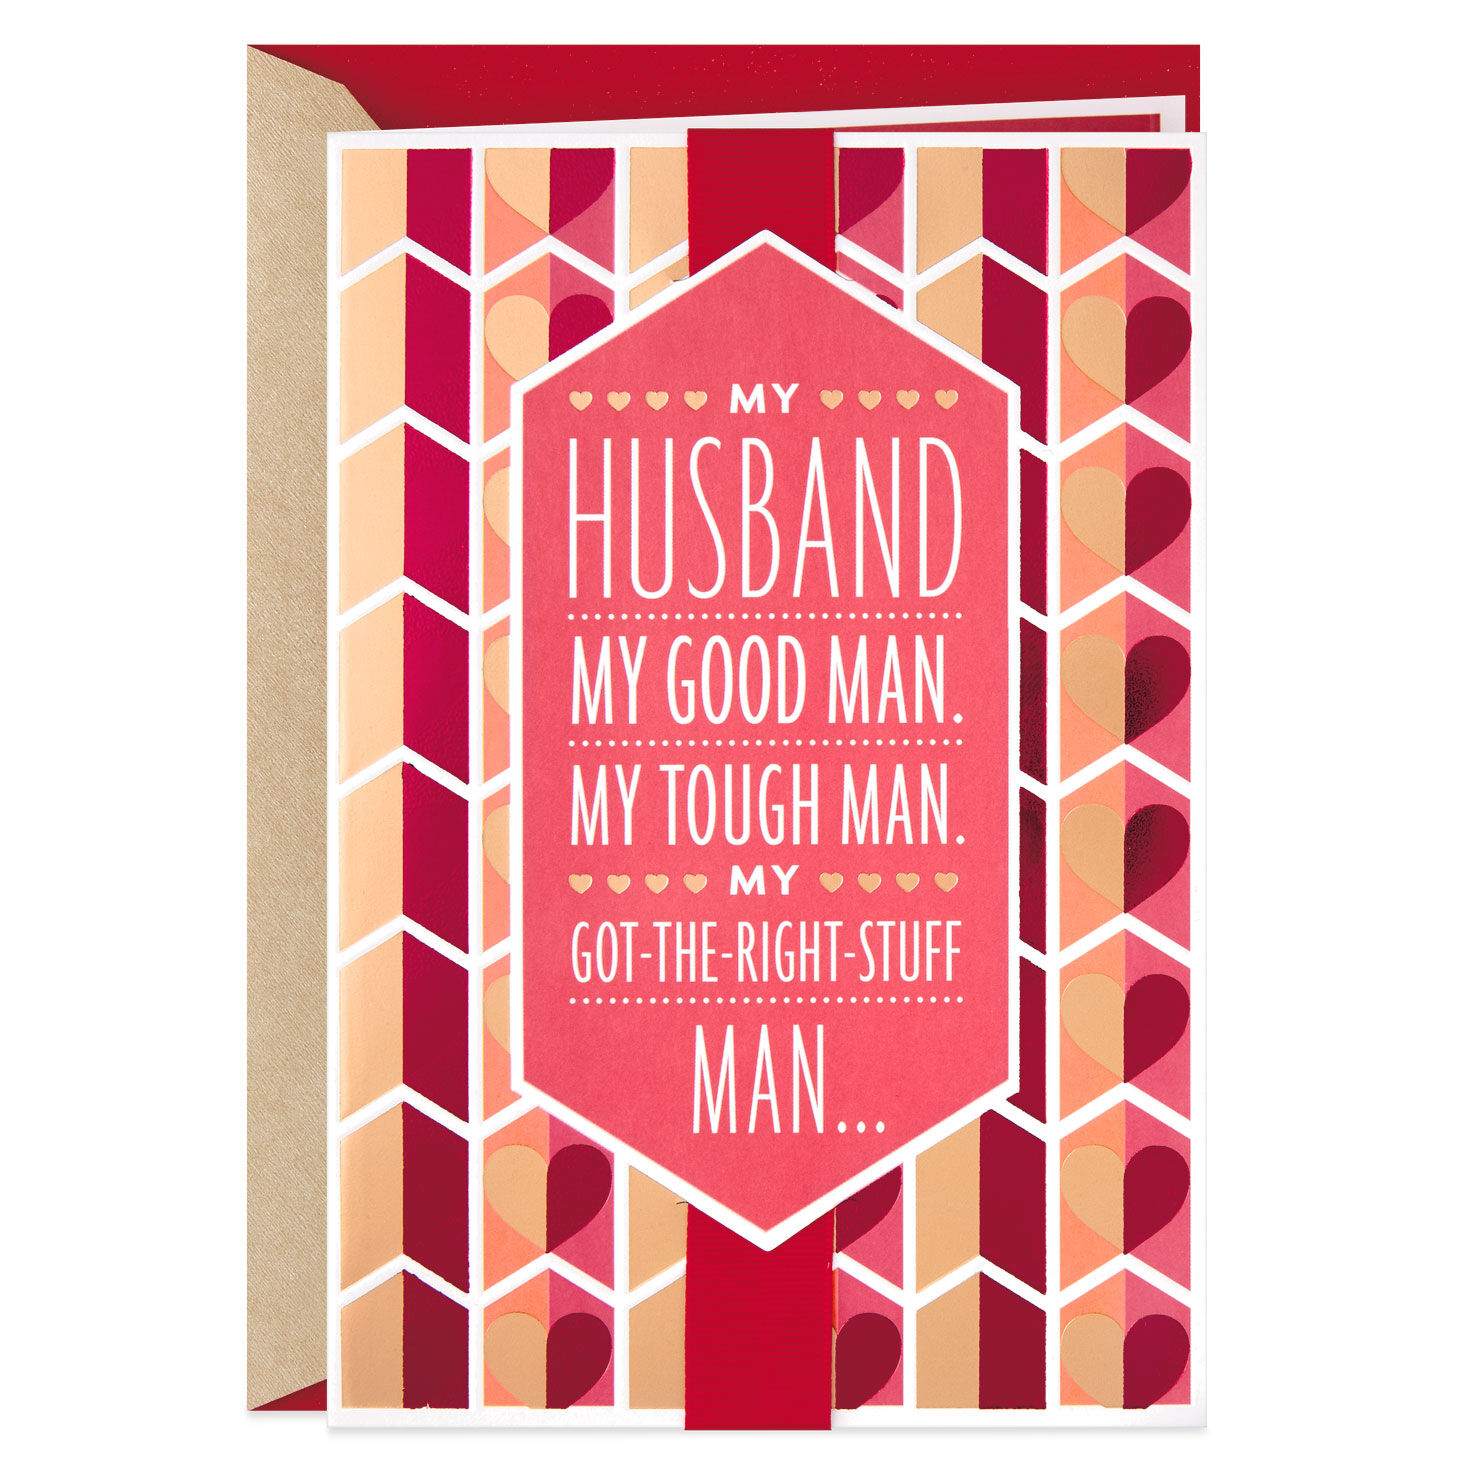 my-got-the-right-stuff-man-valentine-s-day-card-for-husband-greeting